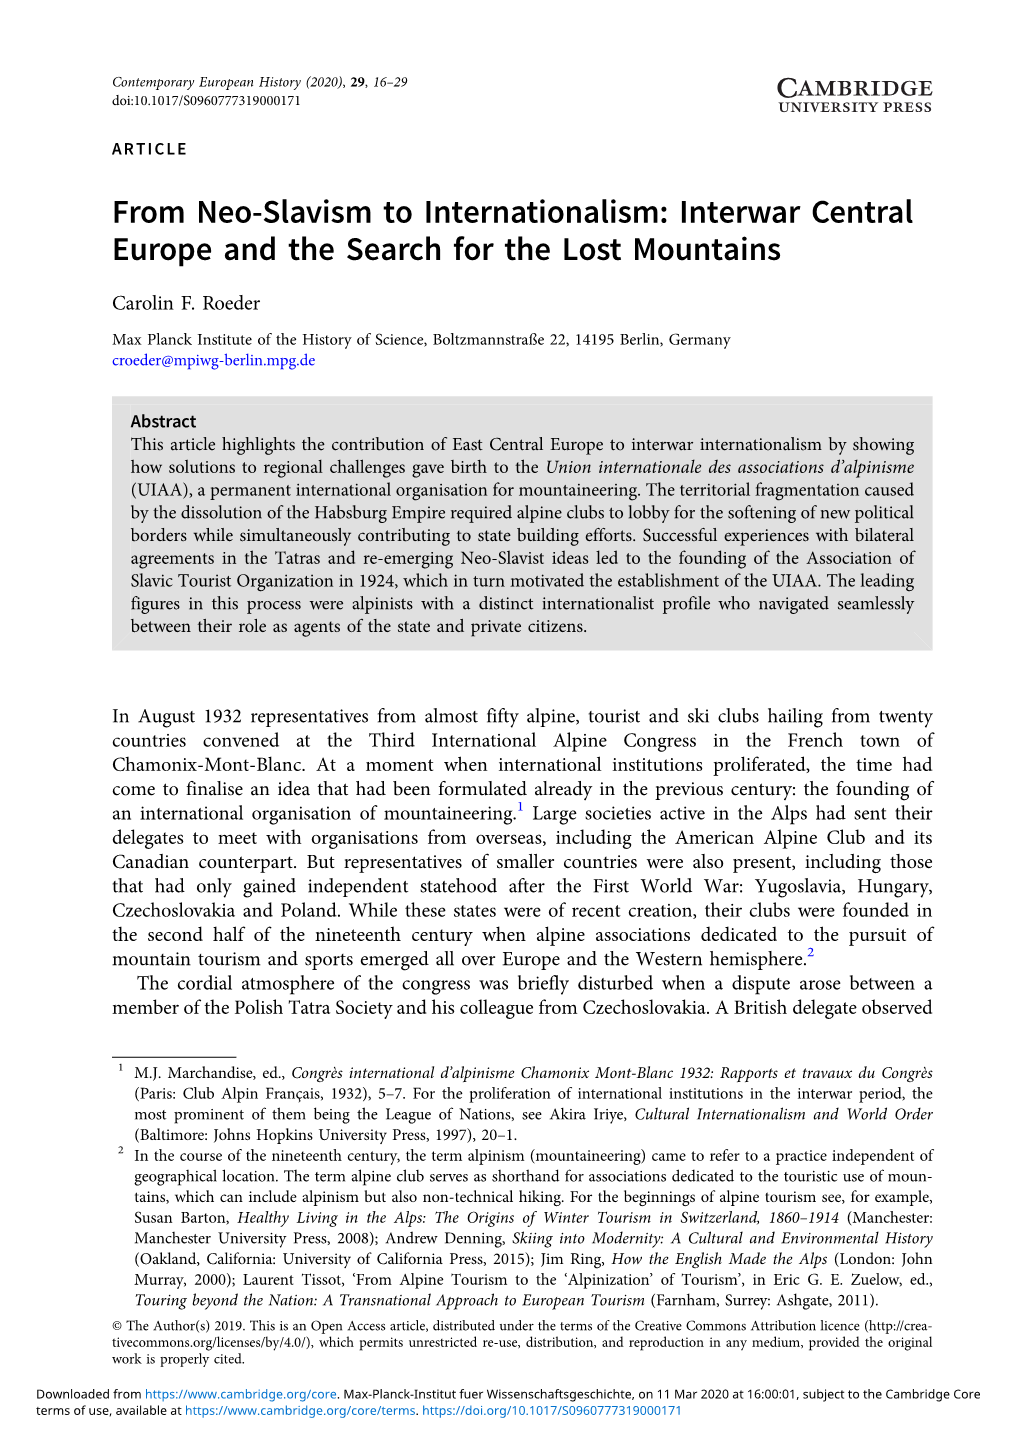 Interwar Central Europe and the Search for the Lost Mountains